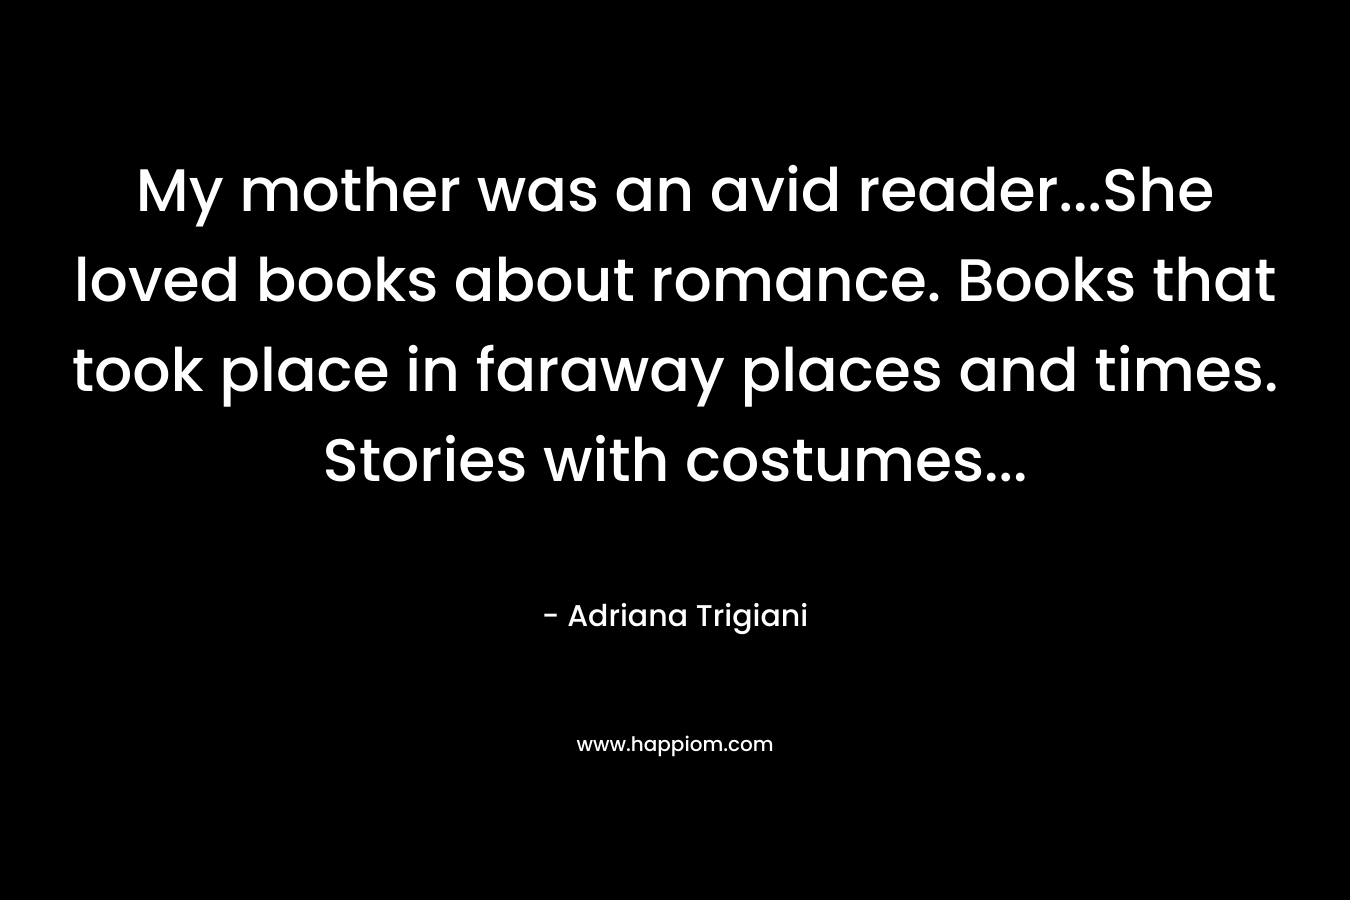 My mother was an avid reader…She loved books about romance. Books that took place in faraway places and times. Stories with costumes… – Adriana Trigiani